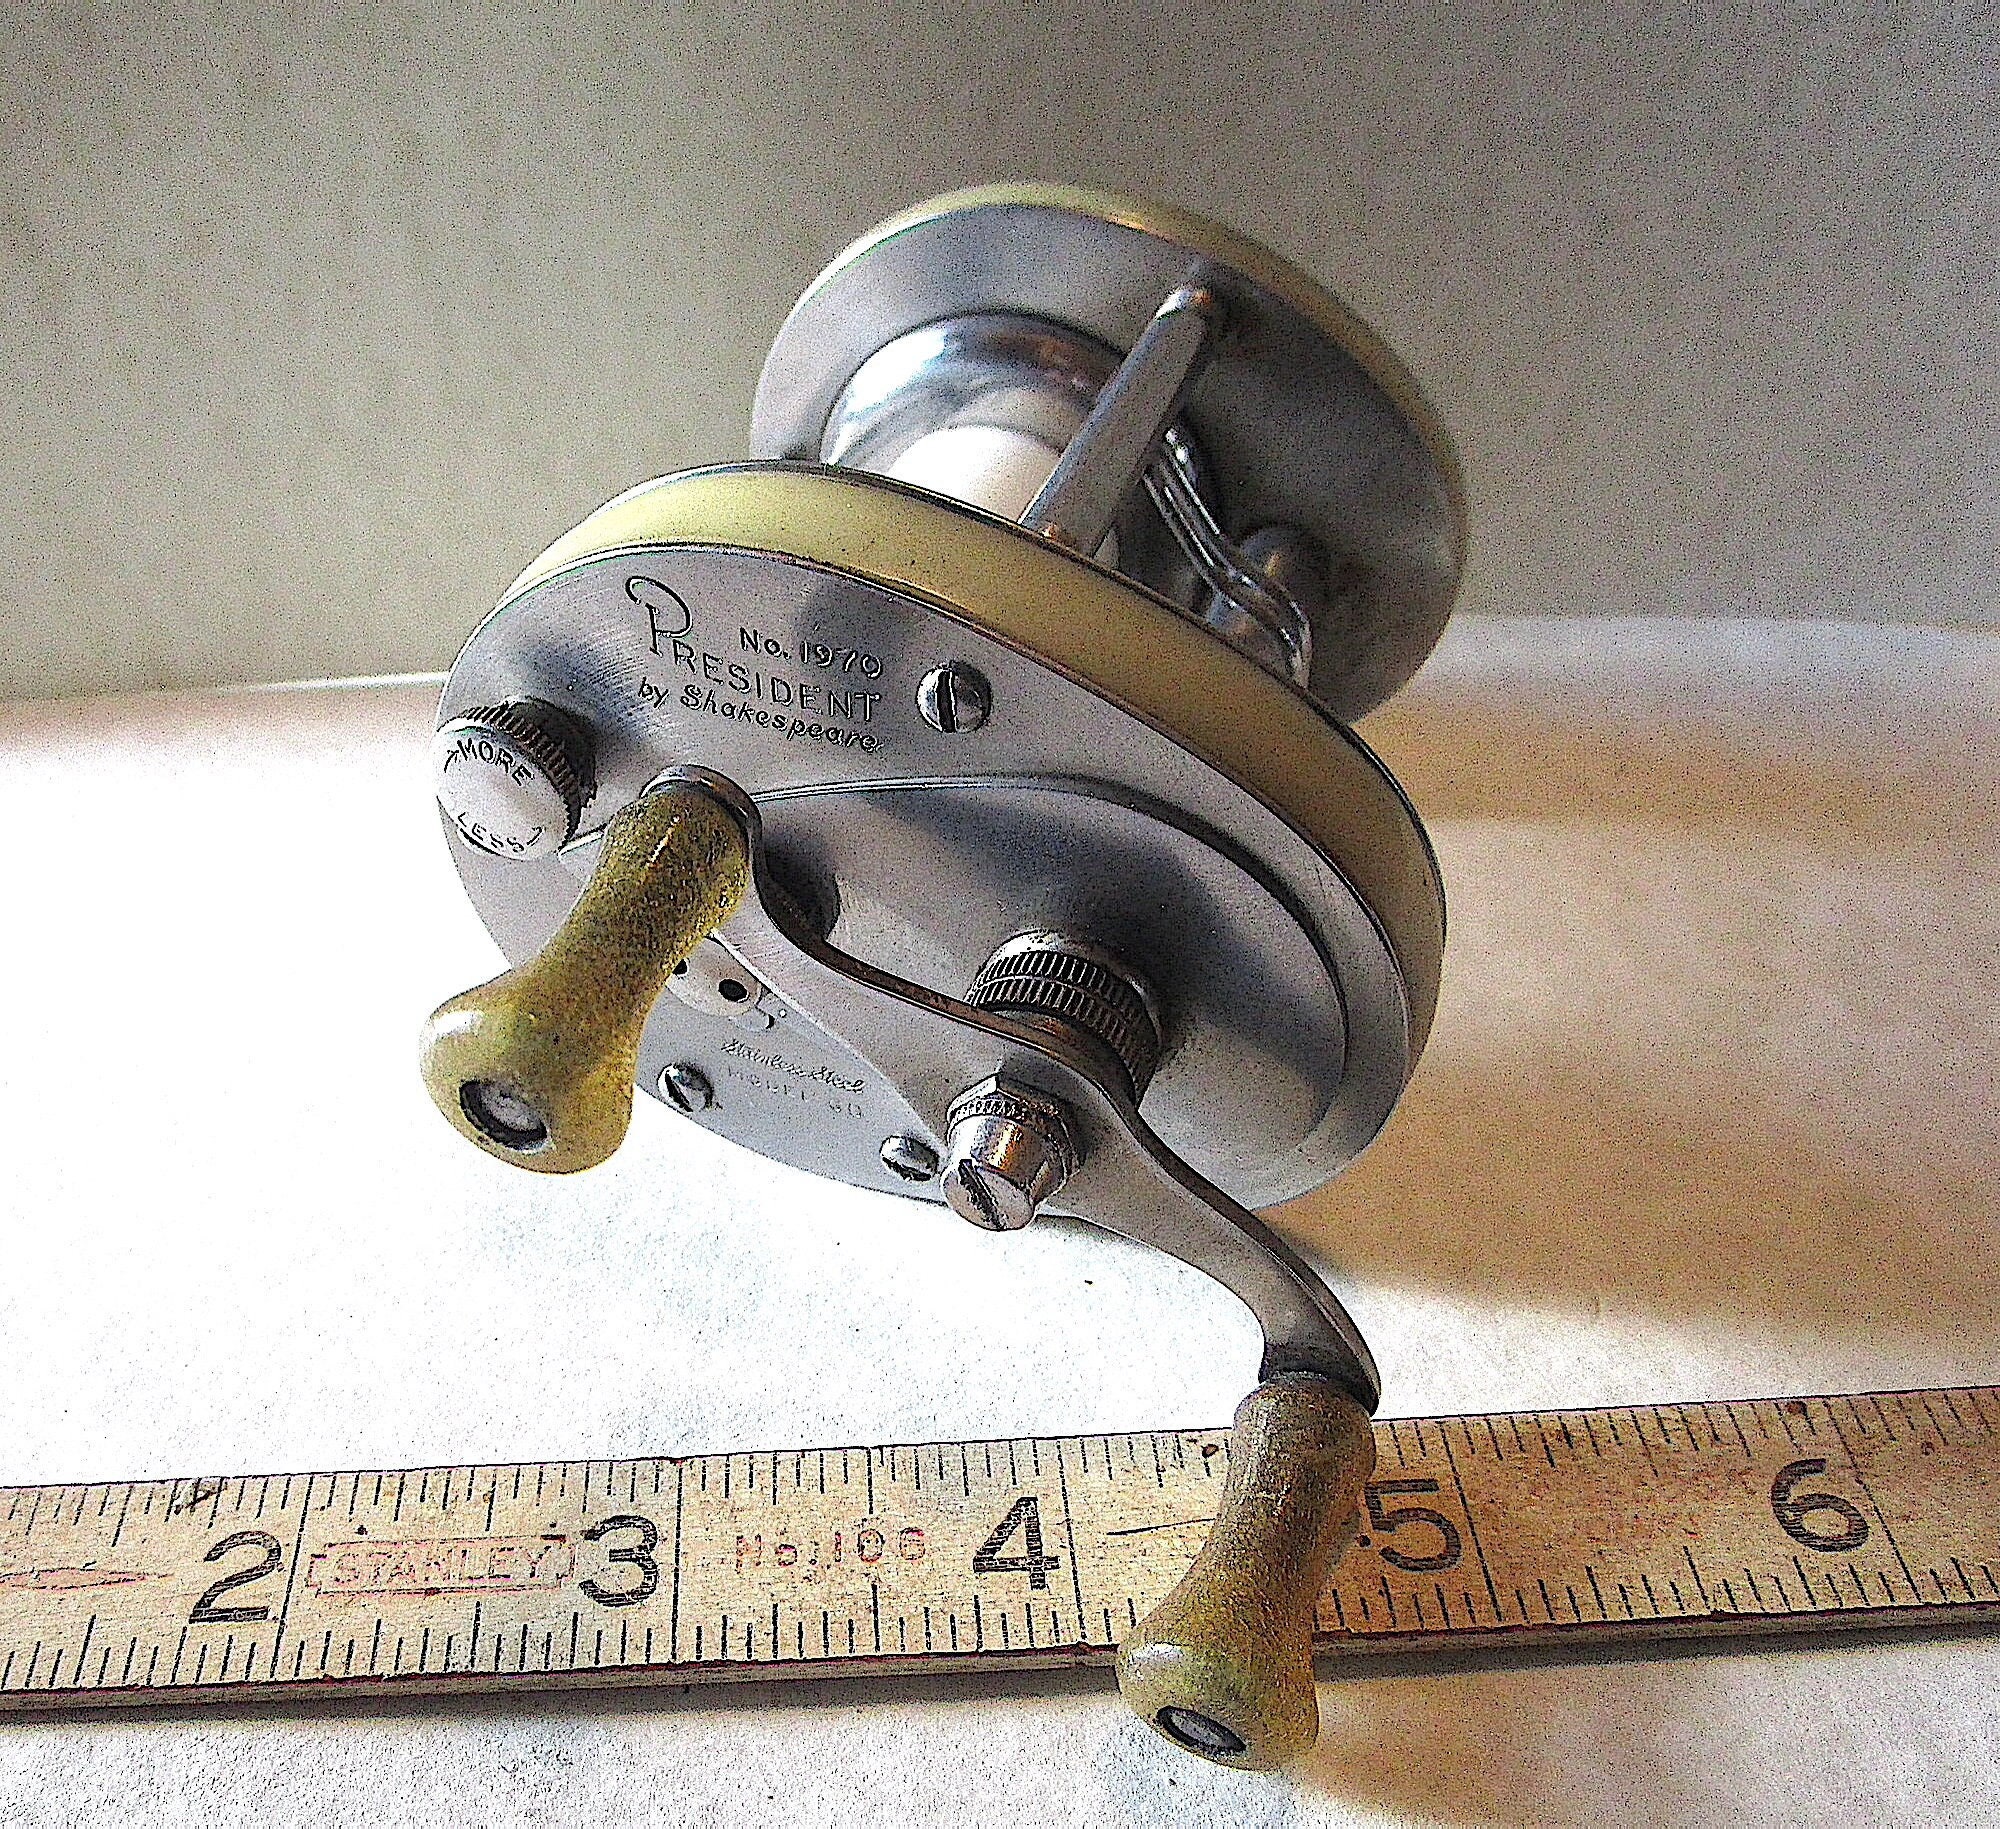 EAF9 EX+. Shakespeare President No. 1970 Model GD (from 1947) old vintage  fishing tackle reel! Stainless Steel!